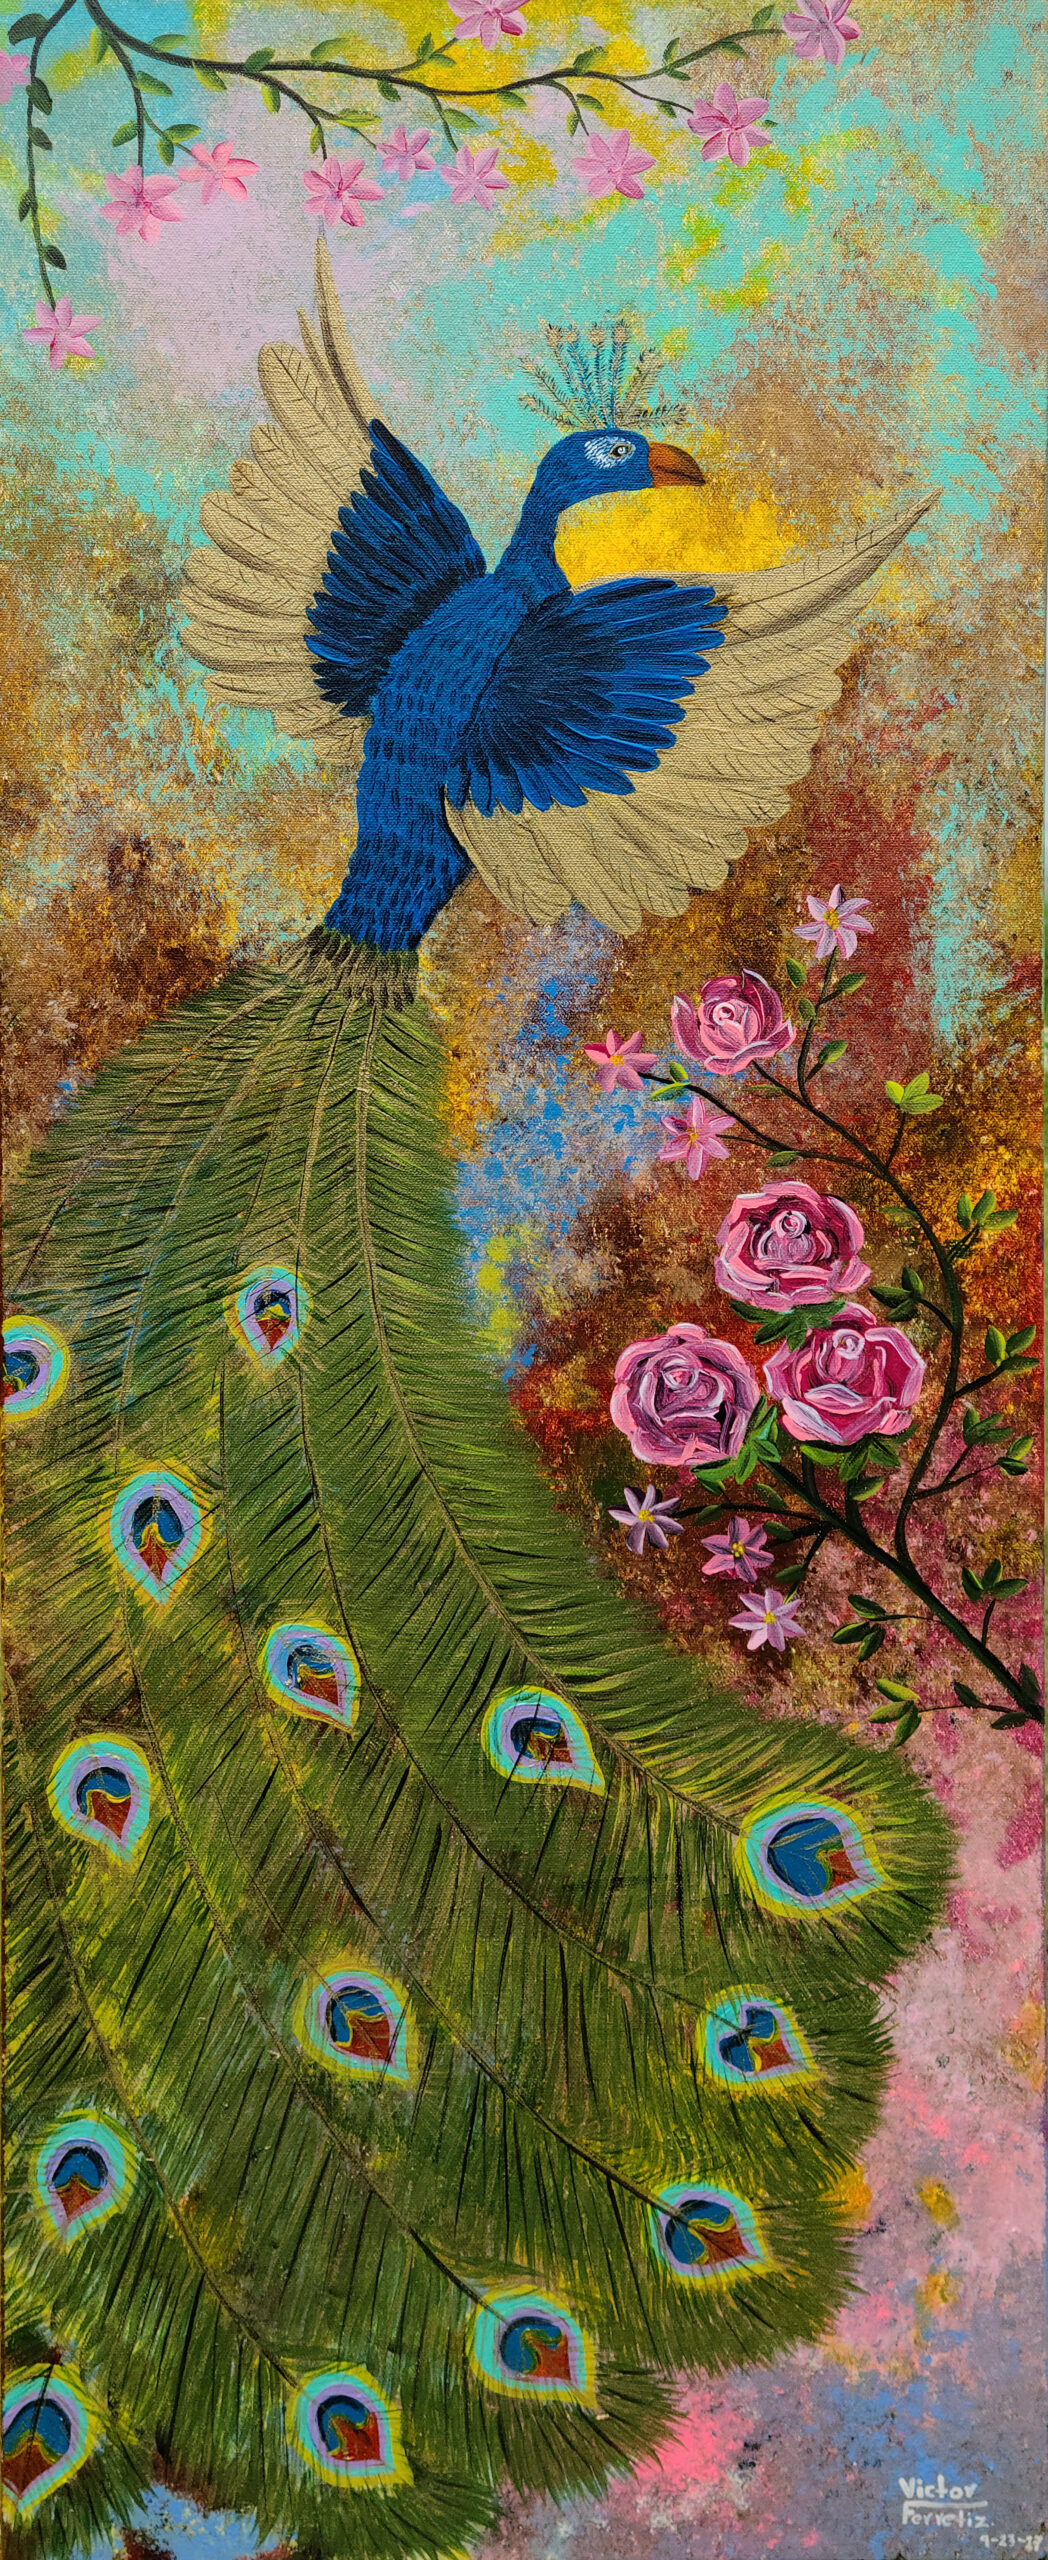 This original work of art shows the surreal image of a peacock flying between rose bushes while the colors of life abound around it. It symbolizes beauty and diversity; the world is made up of many infinite colors that are impossible to calculate.